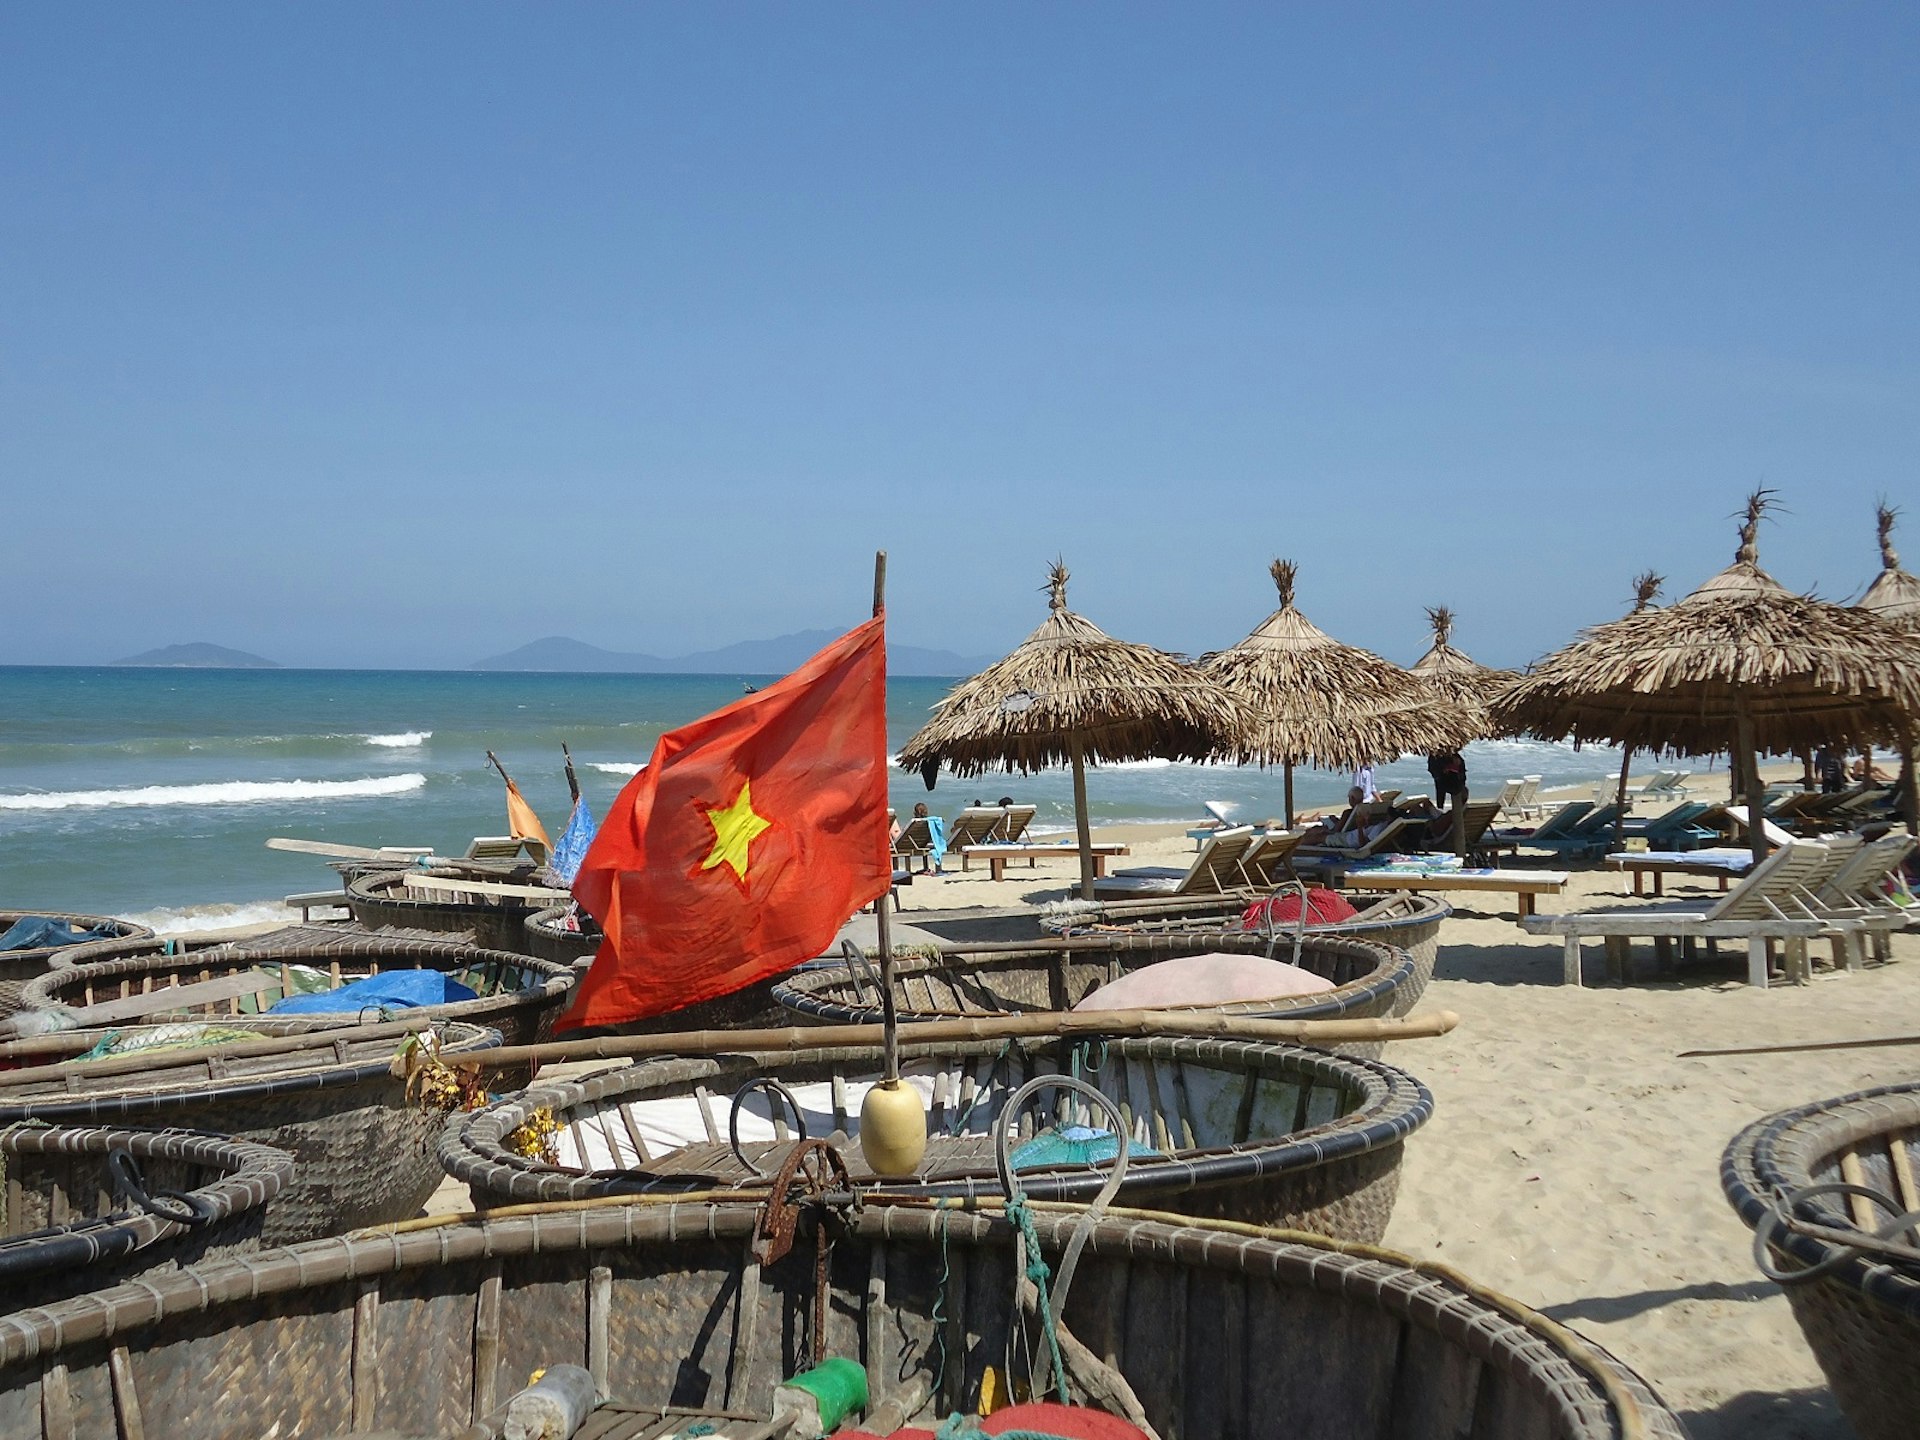 A Vietnamese flag flies above a basket boat on the beach, with some sunshades and sunloungers in the background